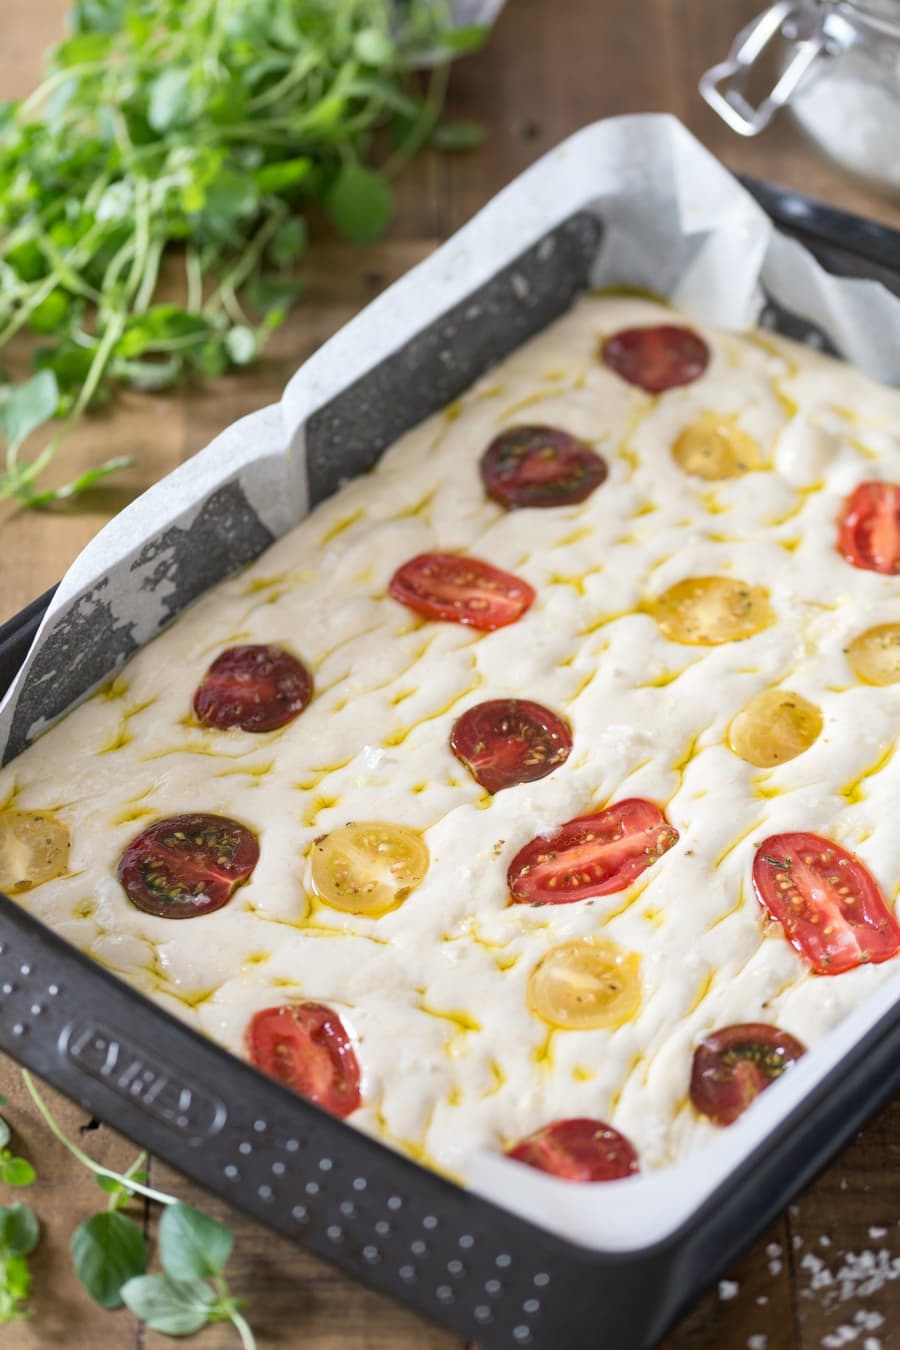 Poolish focaccia bread with cherry tomatoes unbaked.